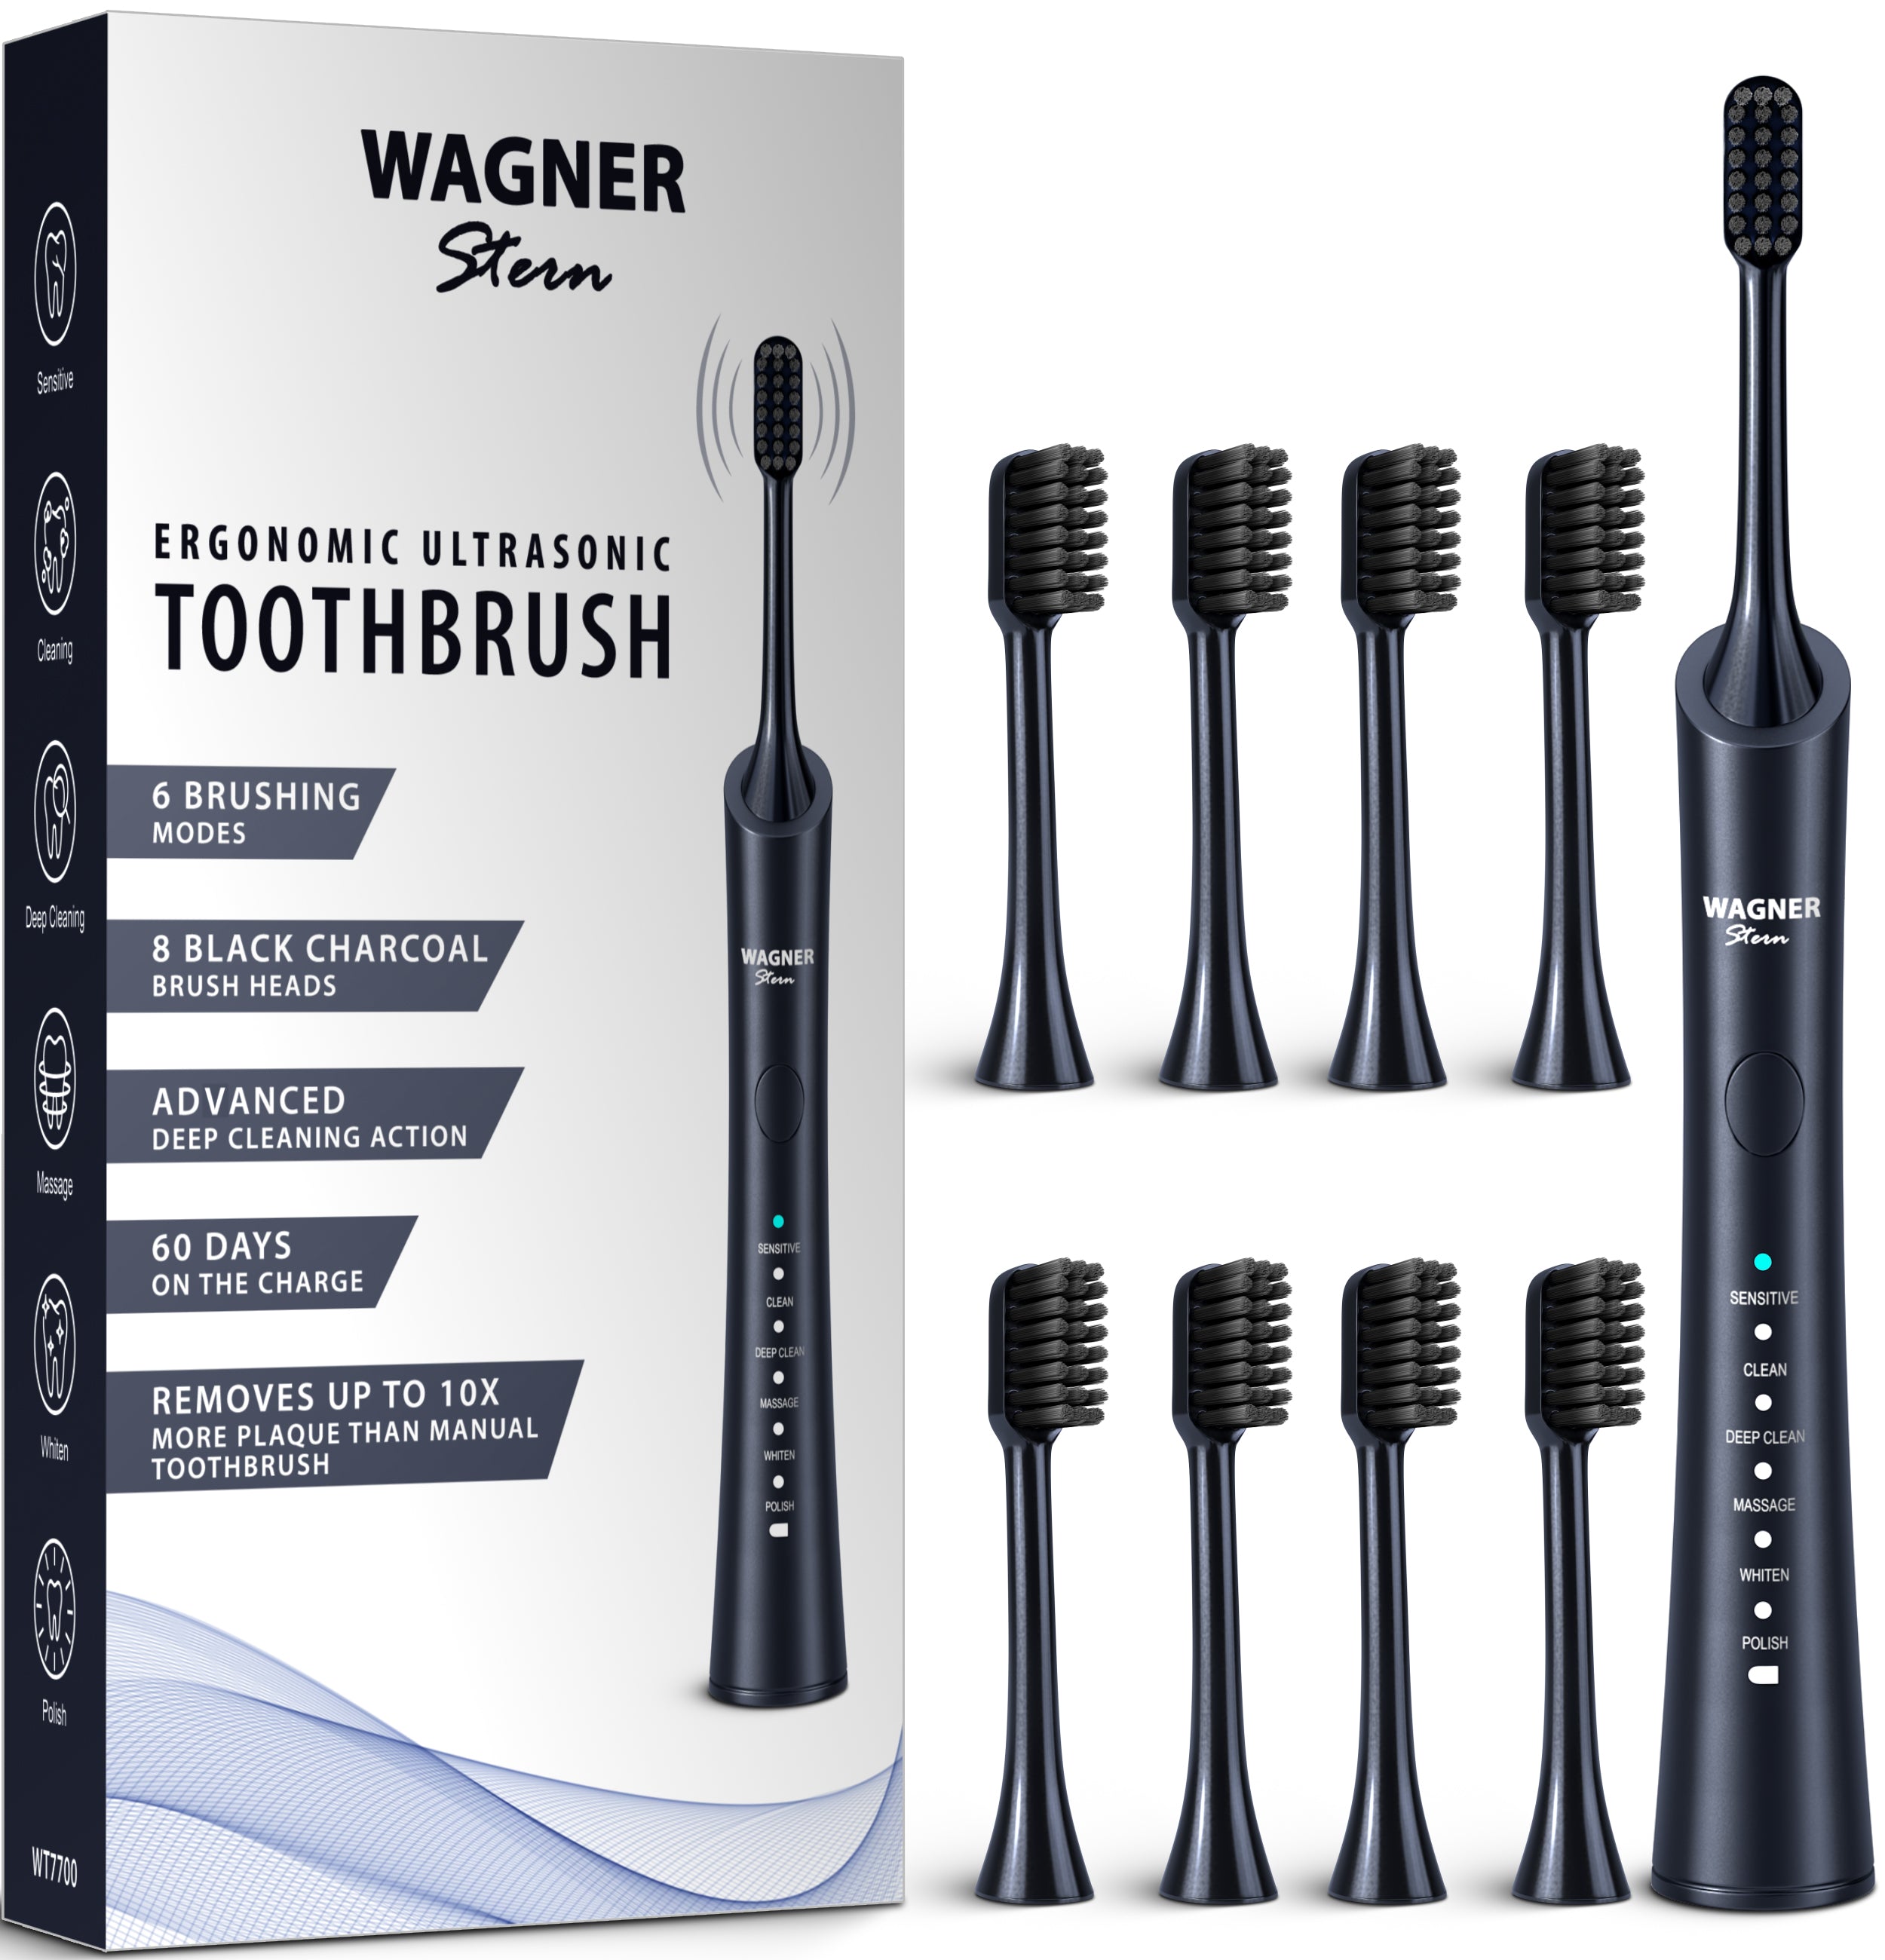 Wagner & Stern ultrasonic whitening Electric Toothbrush with 8 Charcoal Black Brush Heads. for Fresh Breath & Healthy Smile. (Charcoal)